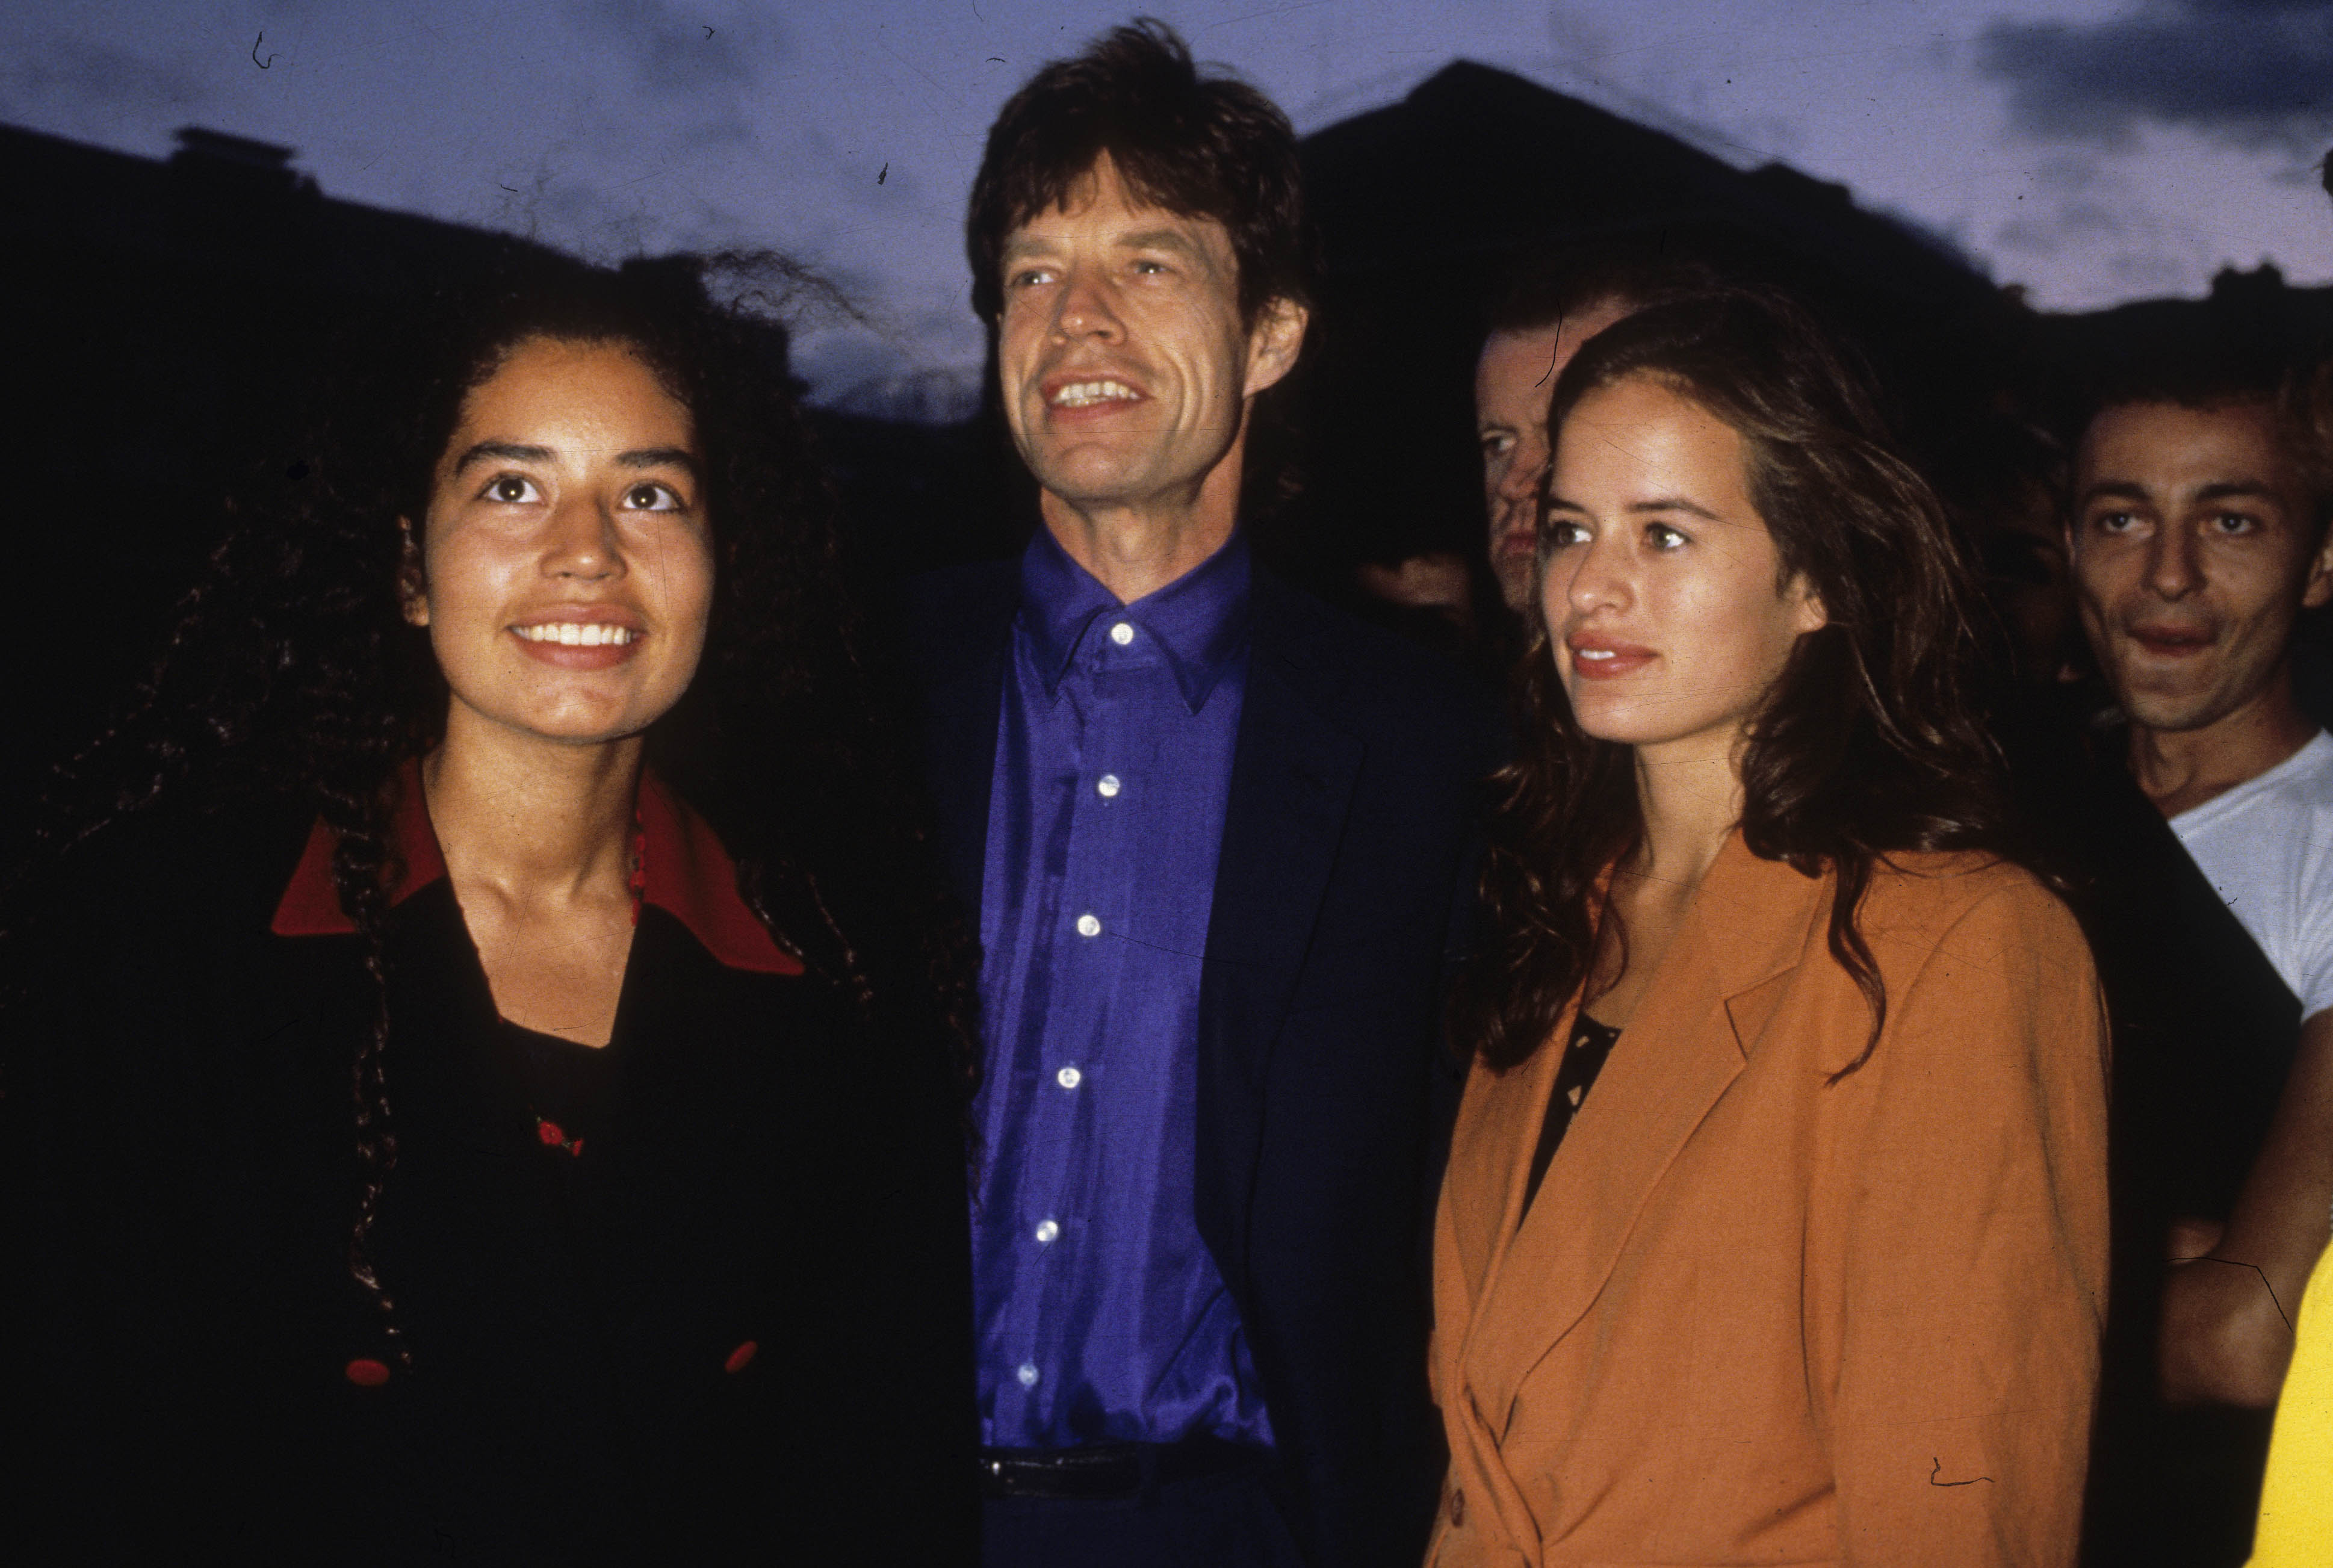 The "Rolling Stones" lead vocalist Mick Jagger poses with his daughters Karis and Jade (R) in 1995 in Paris, France. / Source: Getty Images